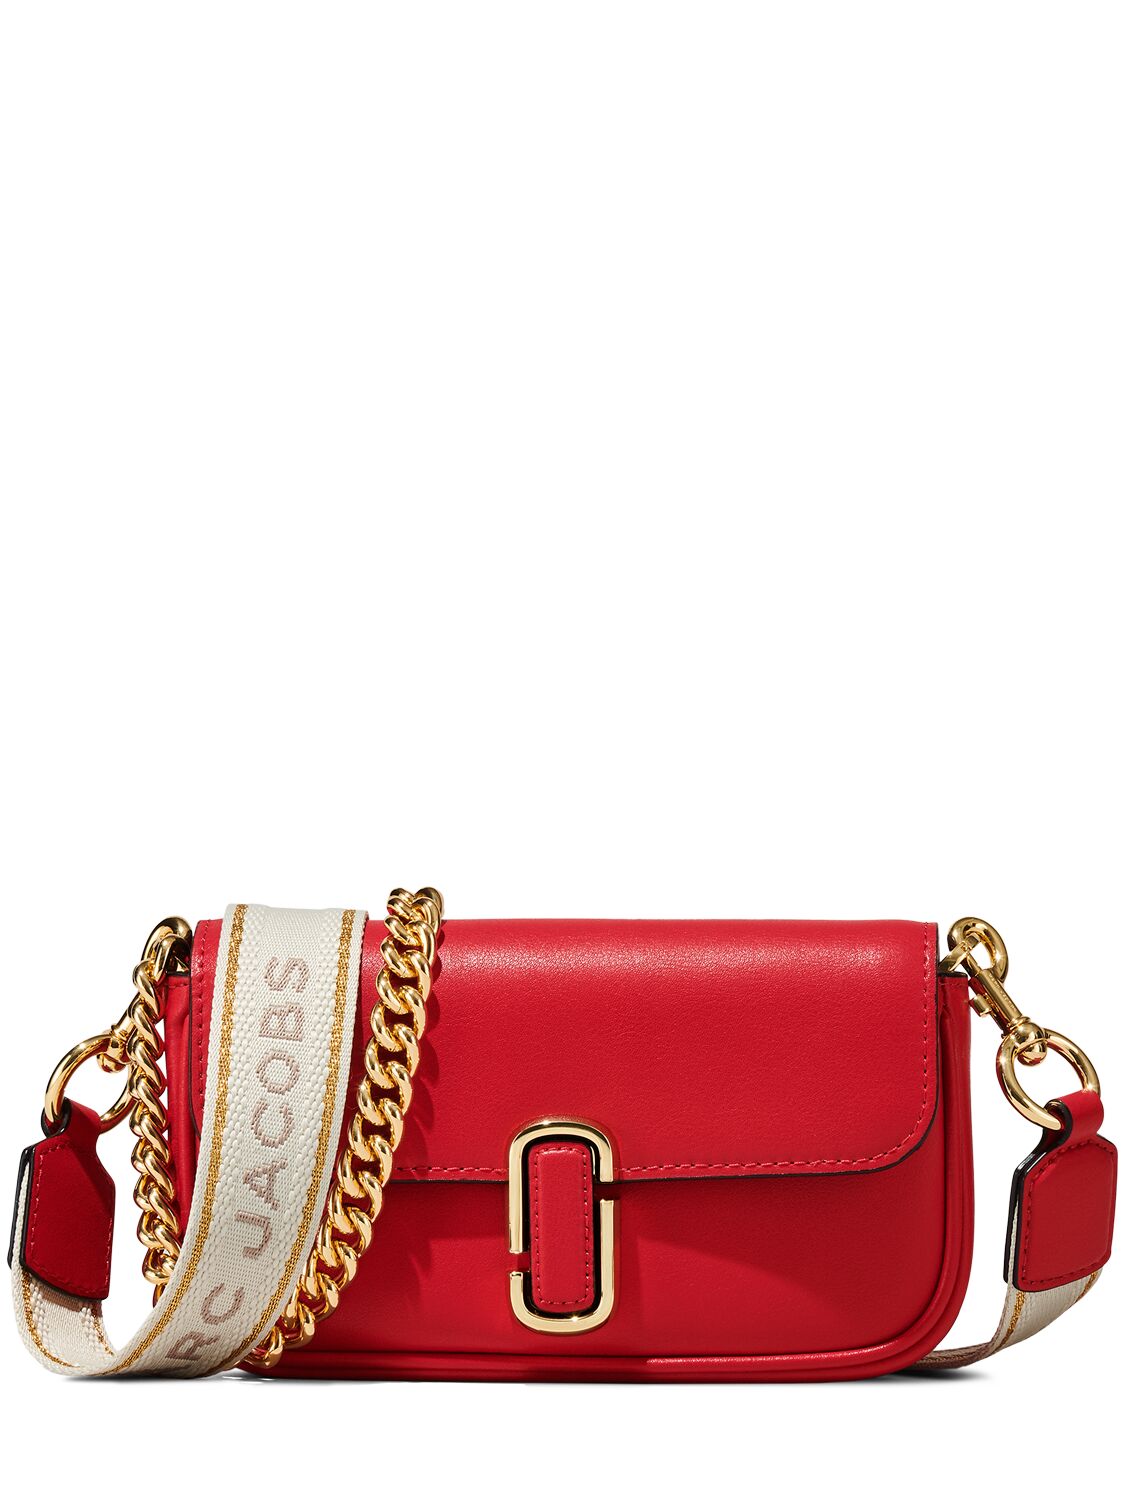 Marc Jacobs The Mini Soft Shoulder Bag In Red